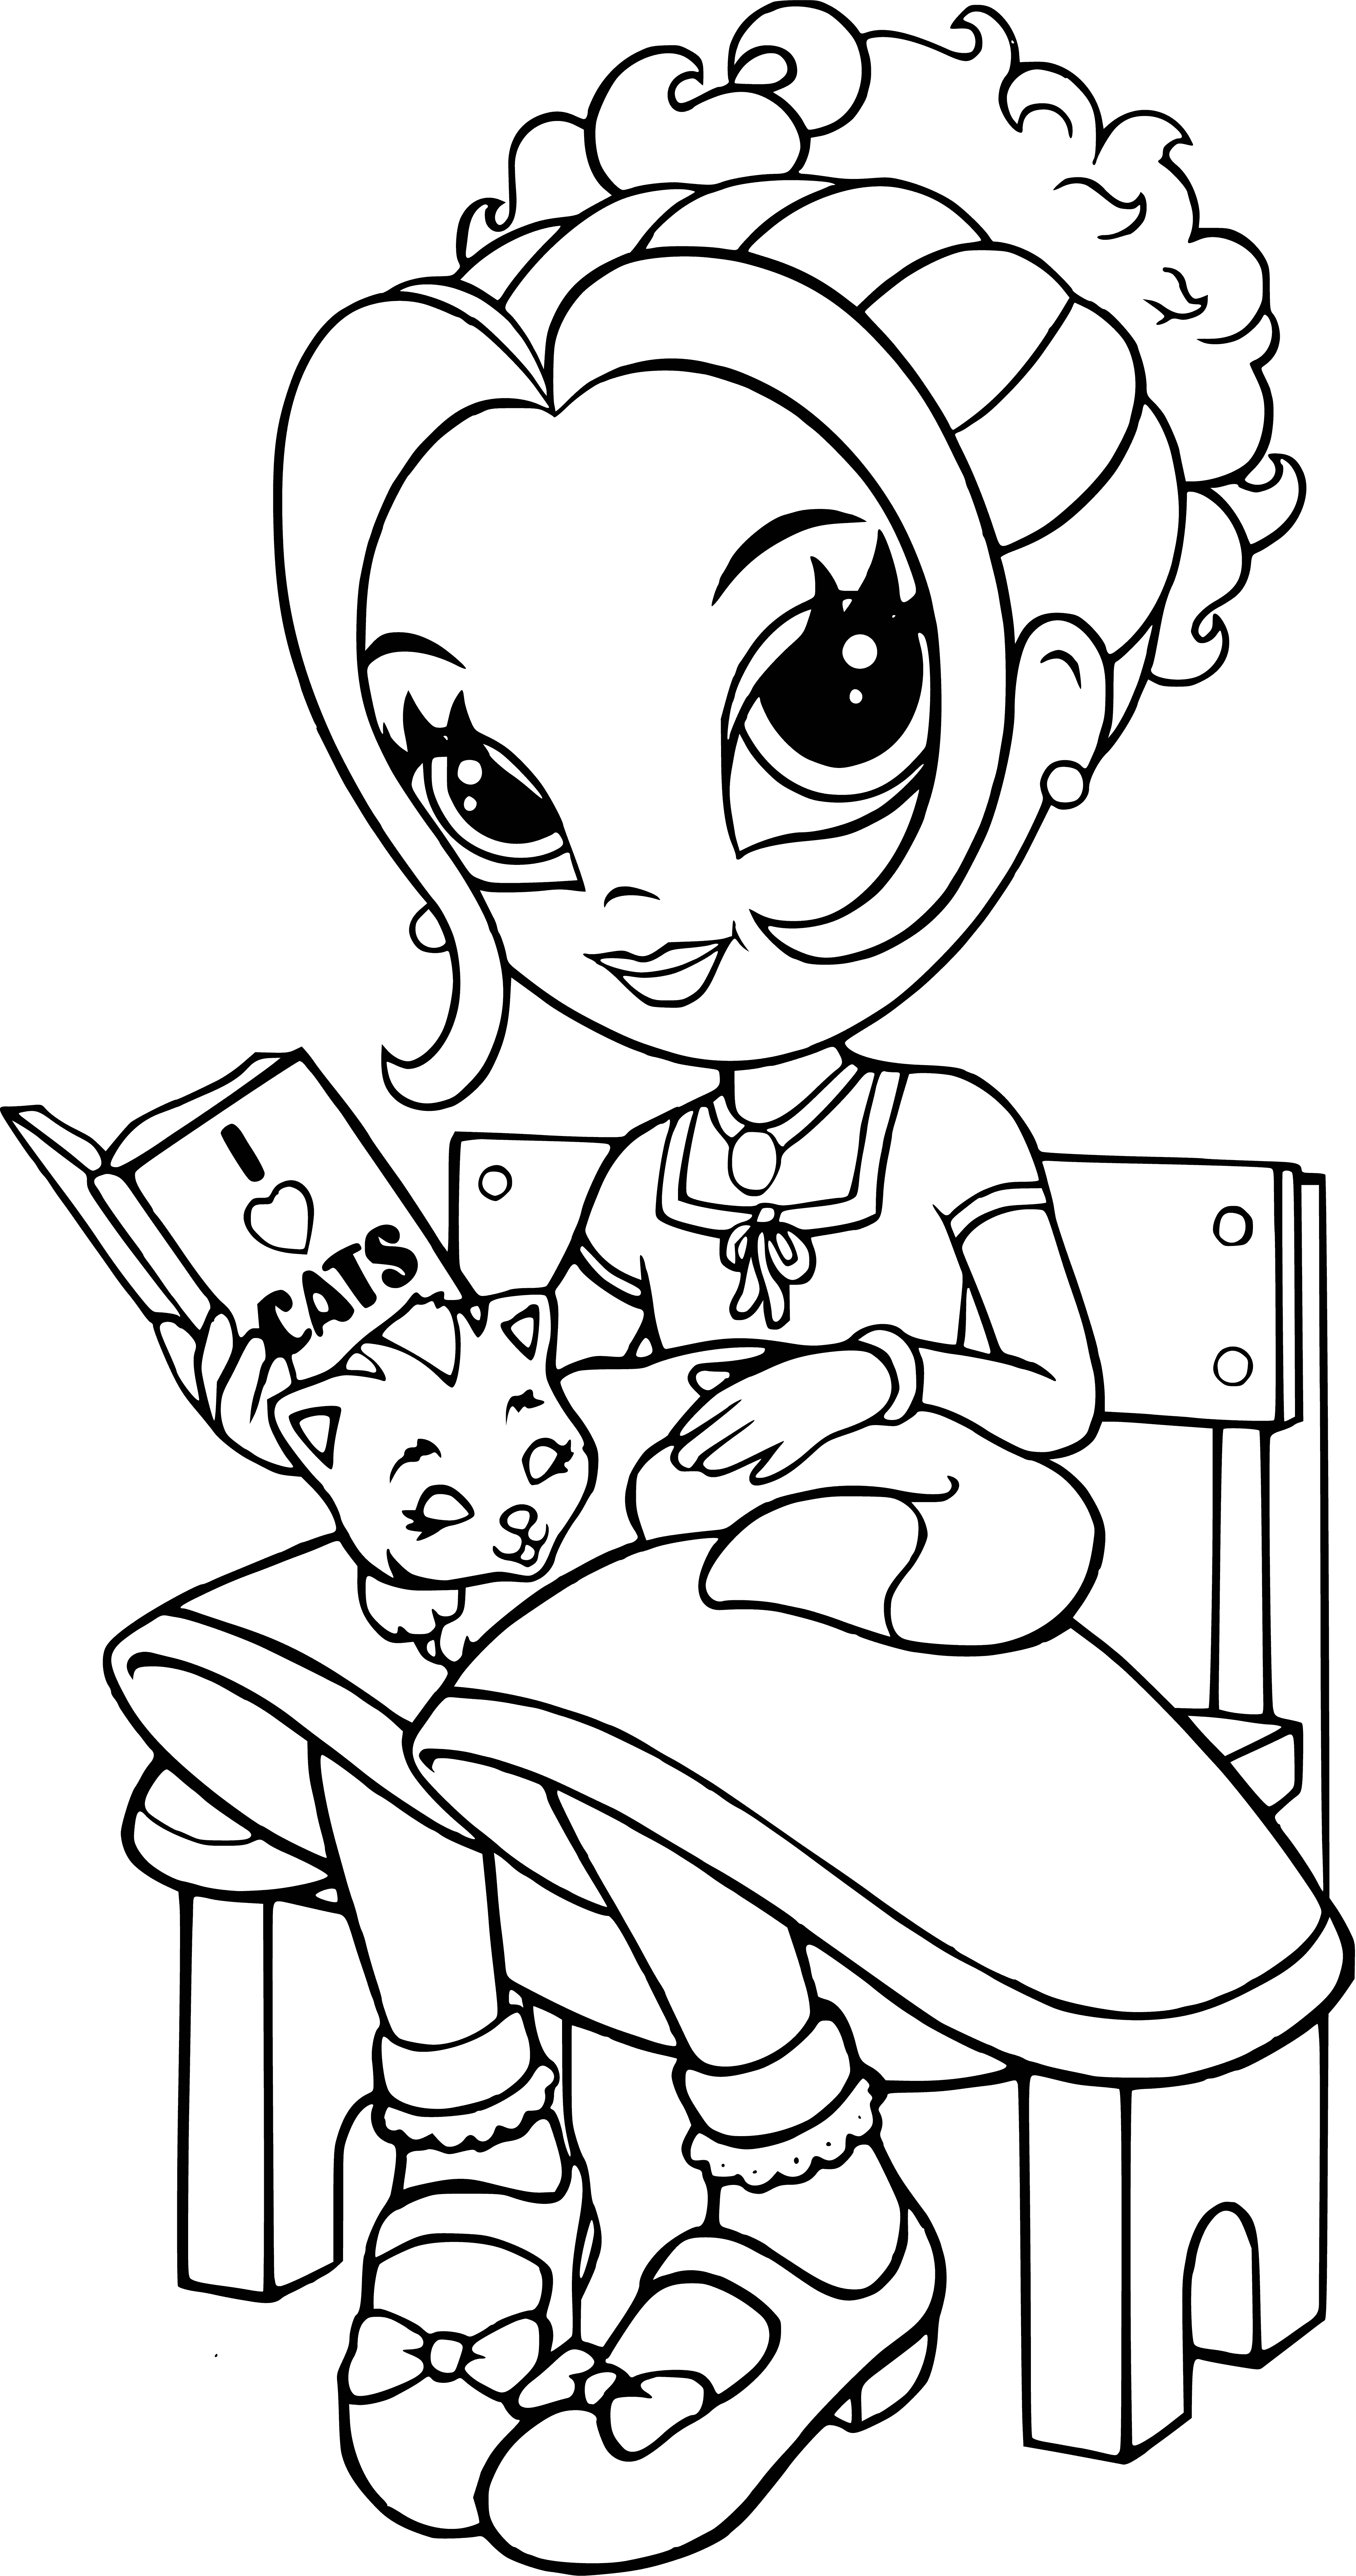 coloring page: Glam girl in sparkling dress with glitzy purse & cellphone, strutting her stuff with big hair & bright makeup.